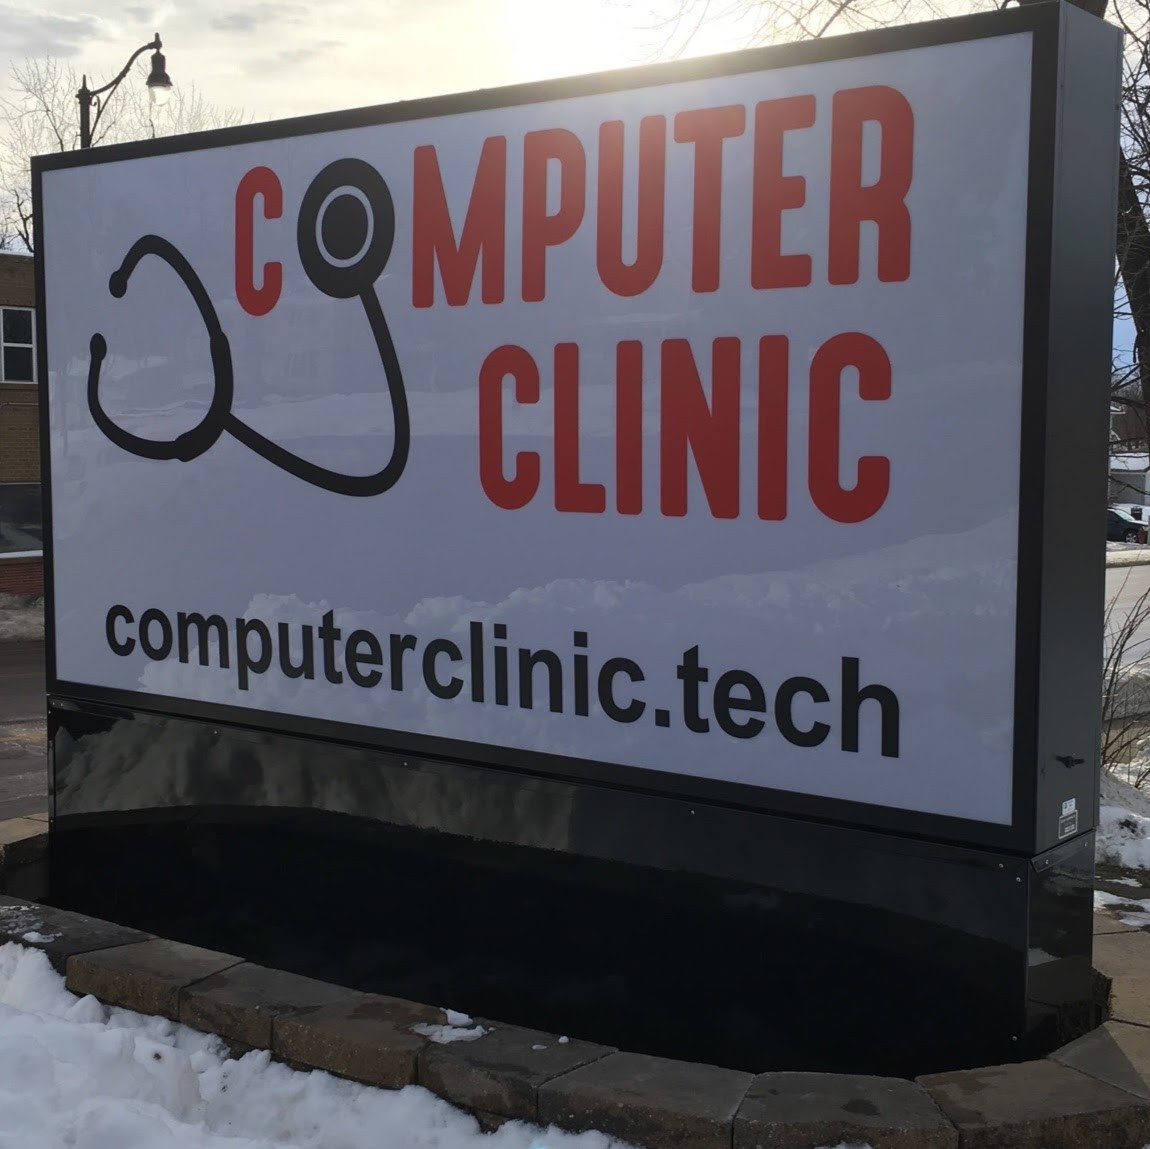 Computer Clinic 117 N Kniss Ave, Luverne Minnesota 56156